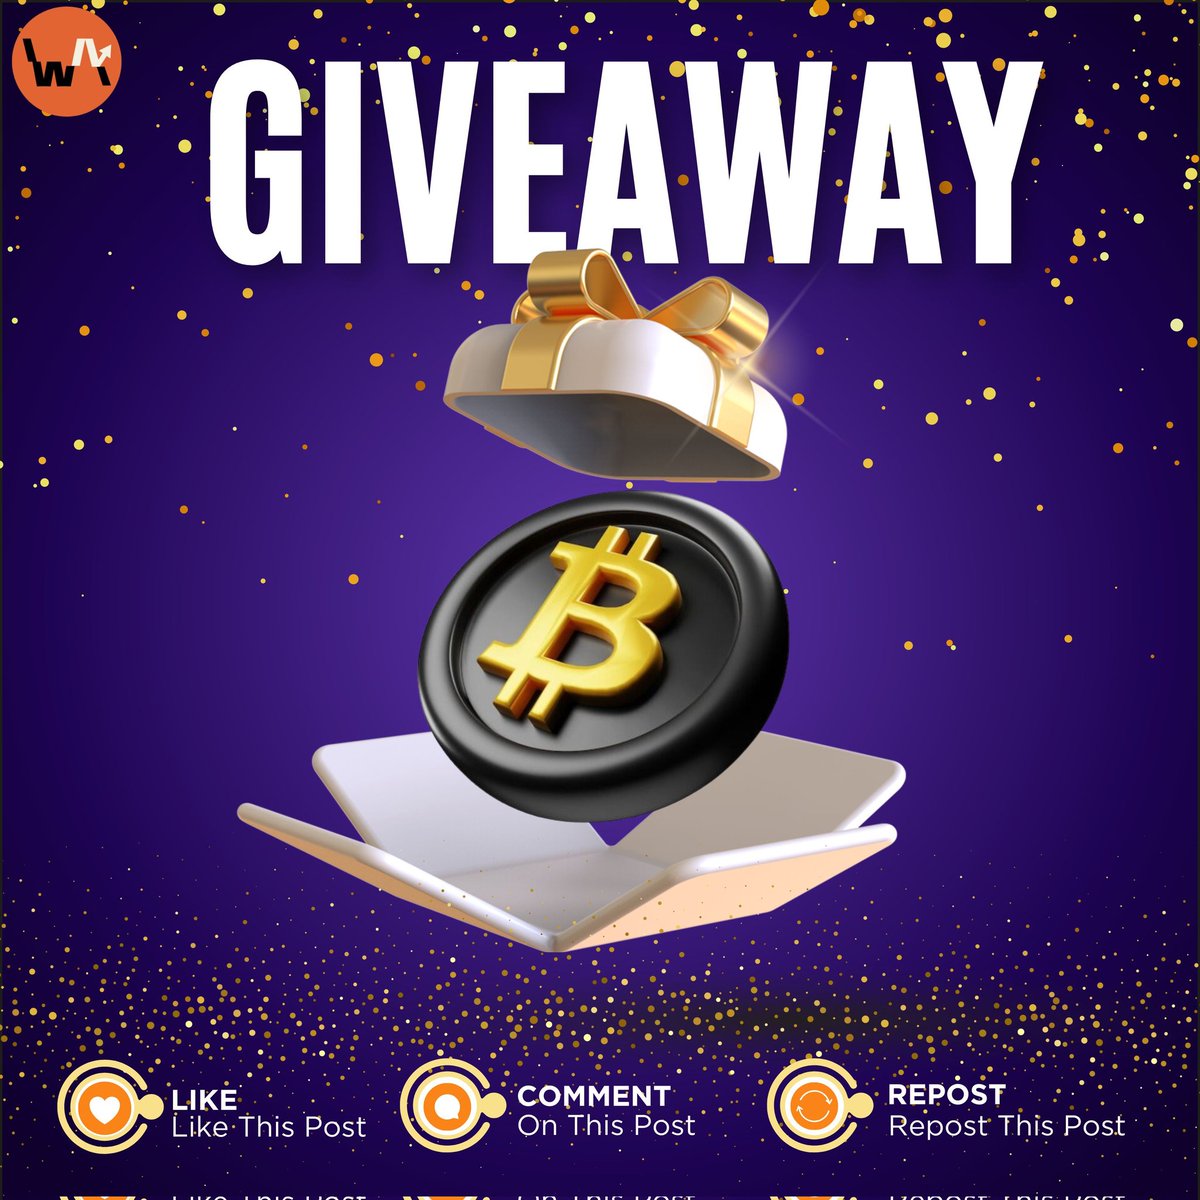 🎉🚨 𝗚𝗜𝗩𝗘𝗔𝗪𝗔𝗬 𝗔𝗟𝗘𝗥𝗧 🚨🎉 I am back with another giveaway to celebrate your incredible support.🔥 This time, I’m giving away $𝟱𝟬𝟬 to 2 lucky people. To enter: 1️⃣ Follow @wiseadvicesumit and @moneygurusumit 2️⃣ Like and retweet this tweet 3️⃣ Leave a…